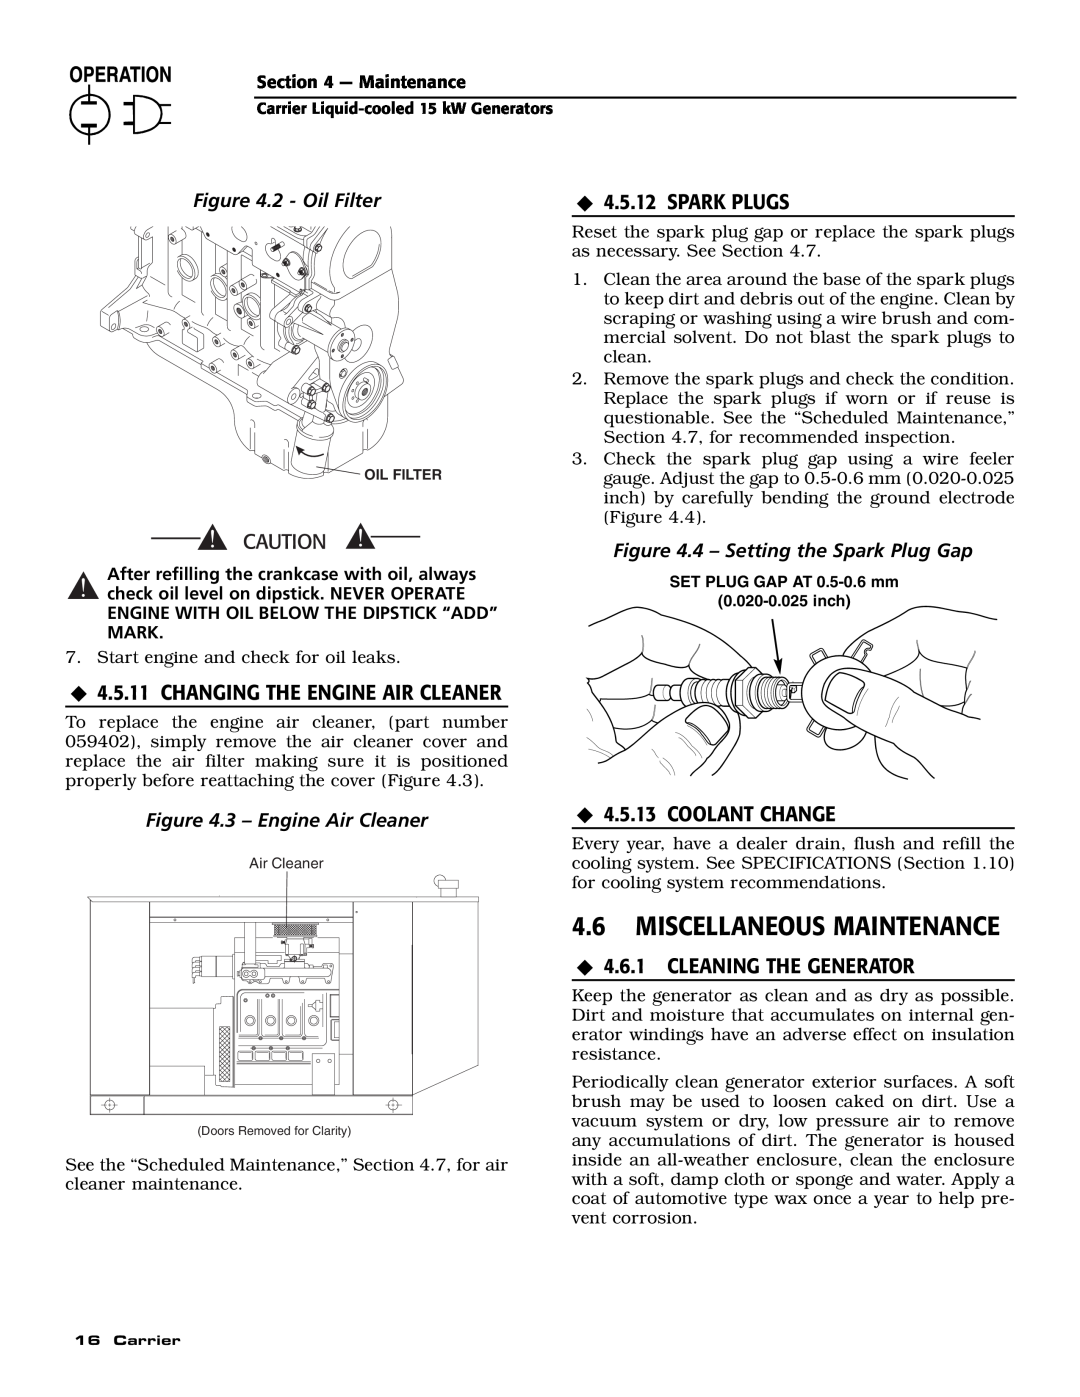 Generac ASPAS1CCL015 owner manual Miscellaneous Maintenance, ‹ 4.5.12 SPARK PLUGS, ‹ 4.5.11 CHANGING THE ENGINE AIR CLEANER 